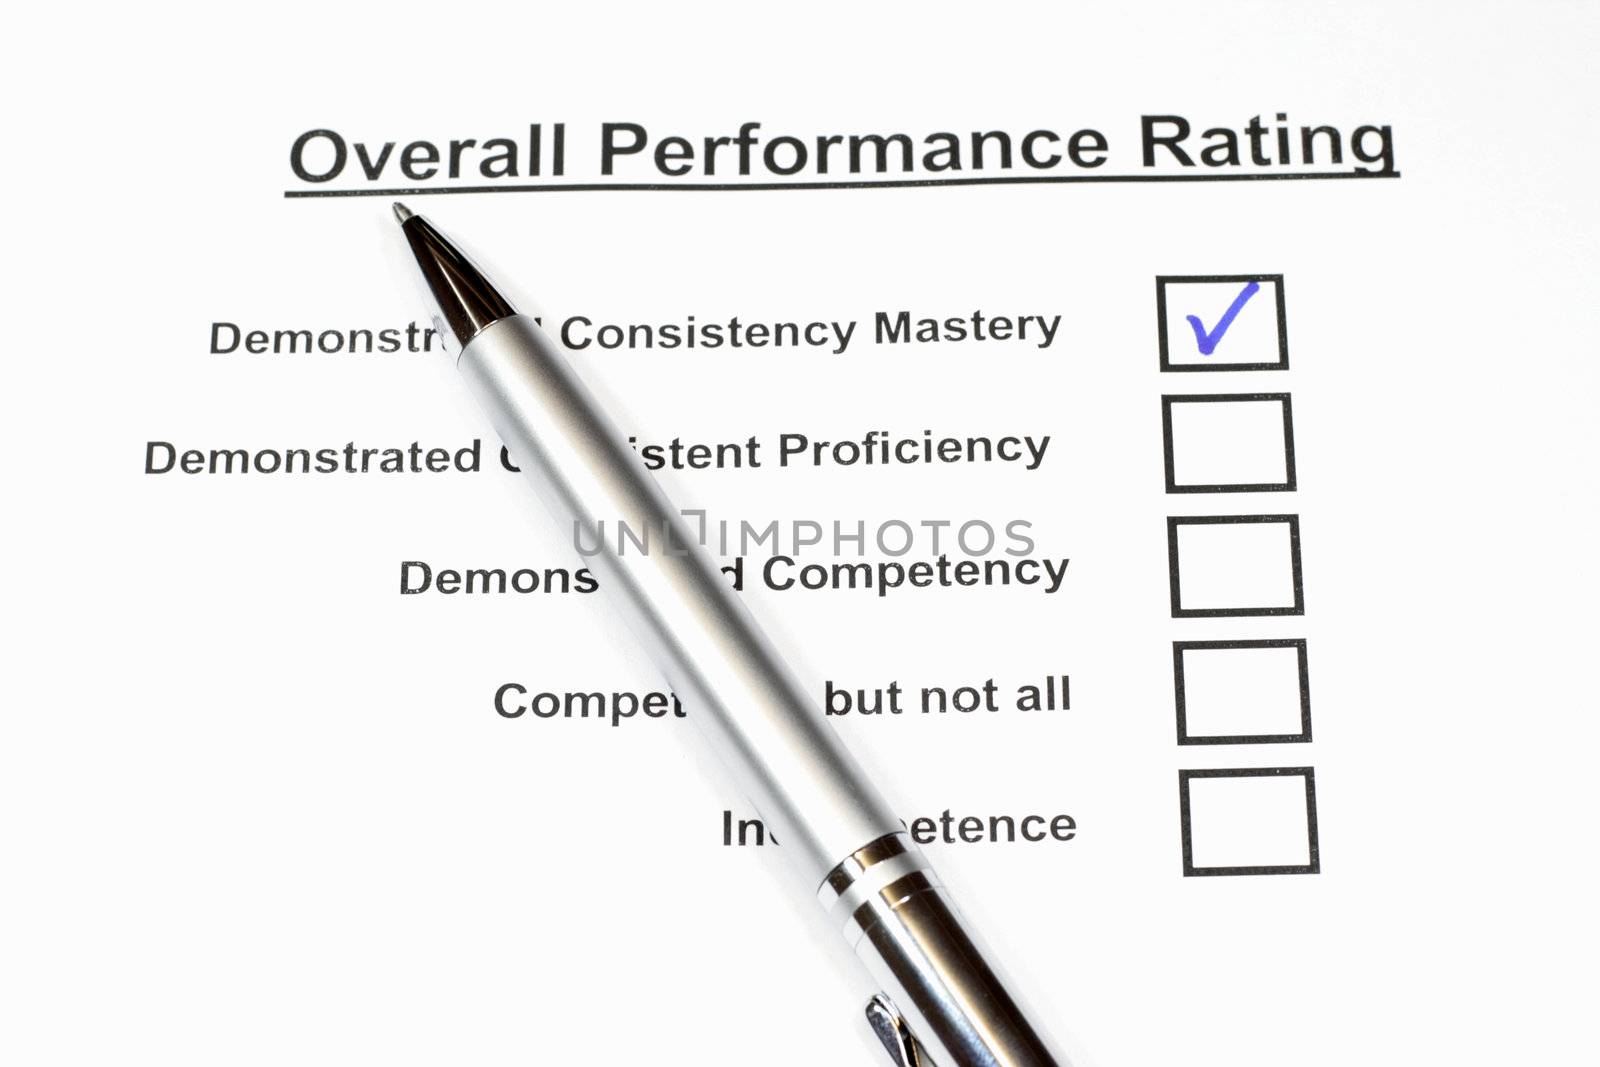 Overall Performance Rating checkbox form for employees